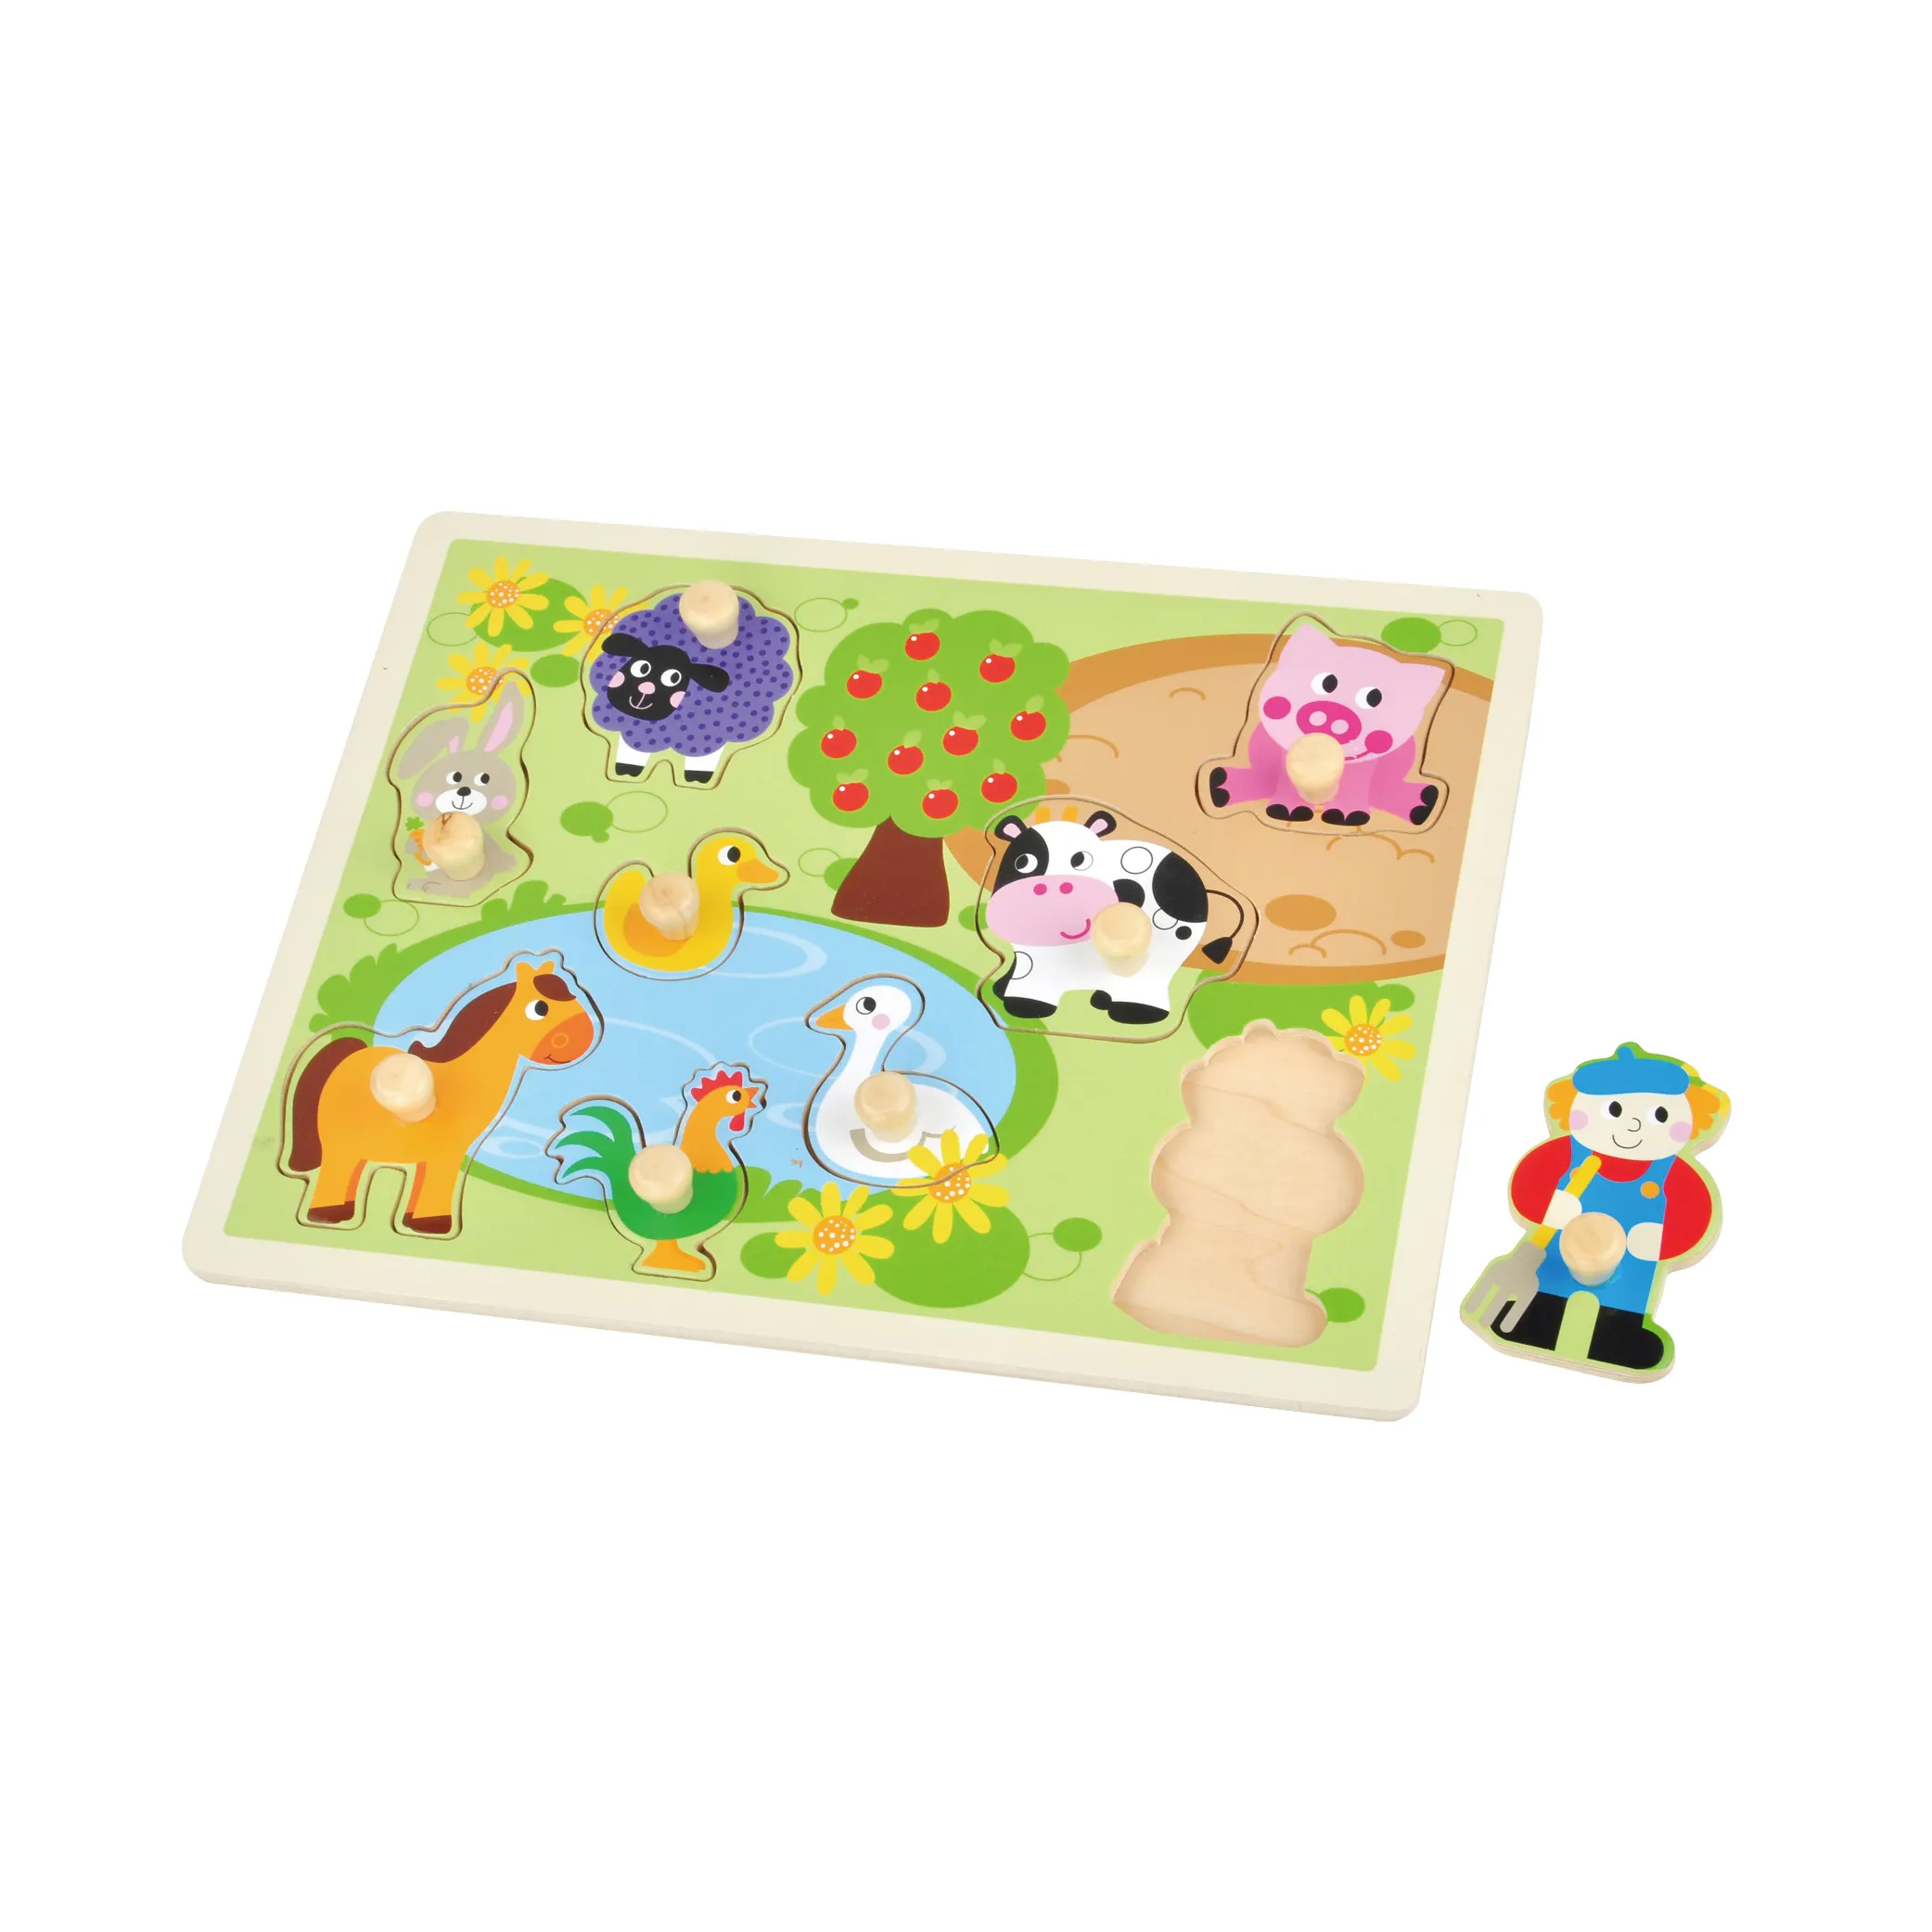 wooden puzzles for kids Children Animal Farm Early Learning Montessori Educational toy For Kids Gifts